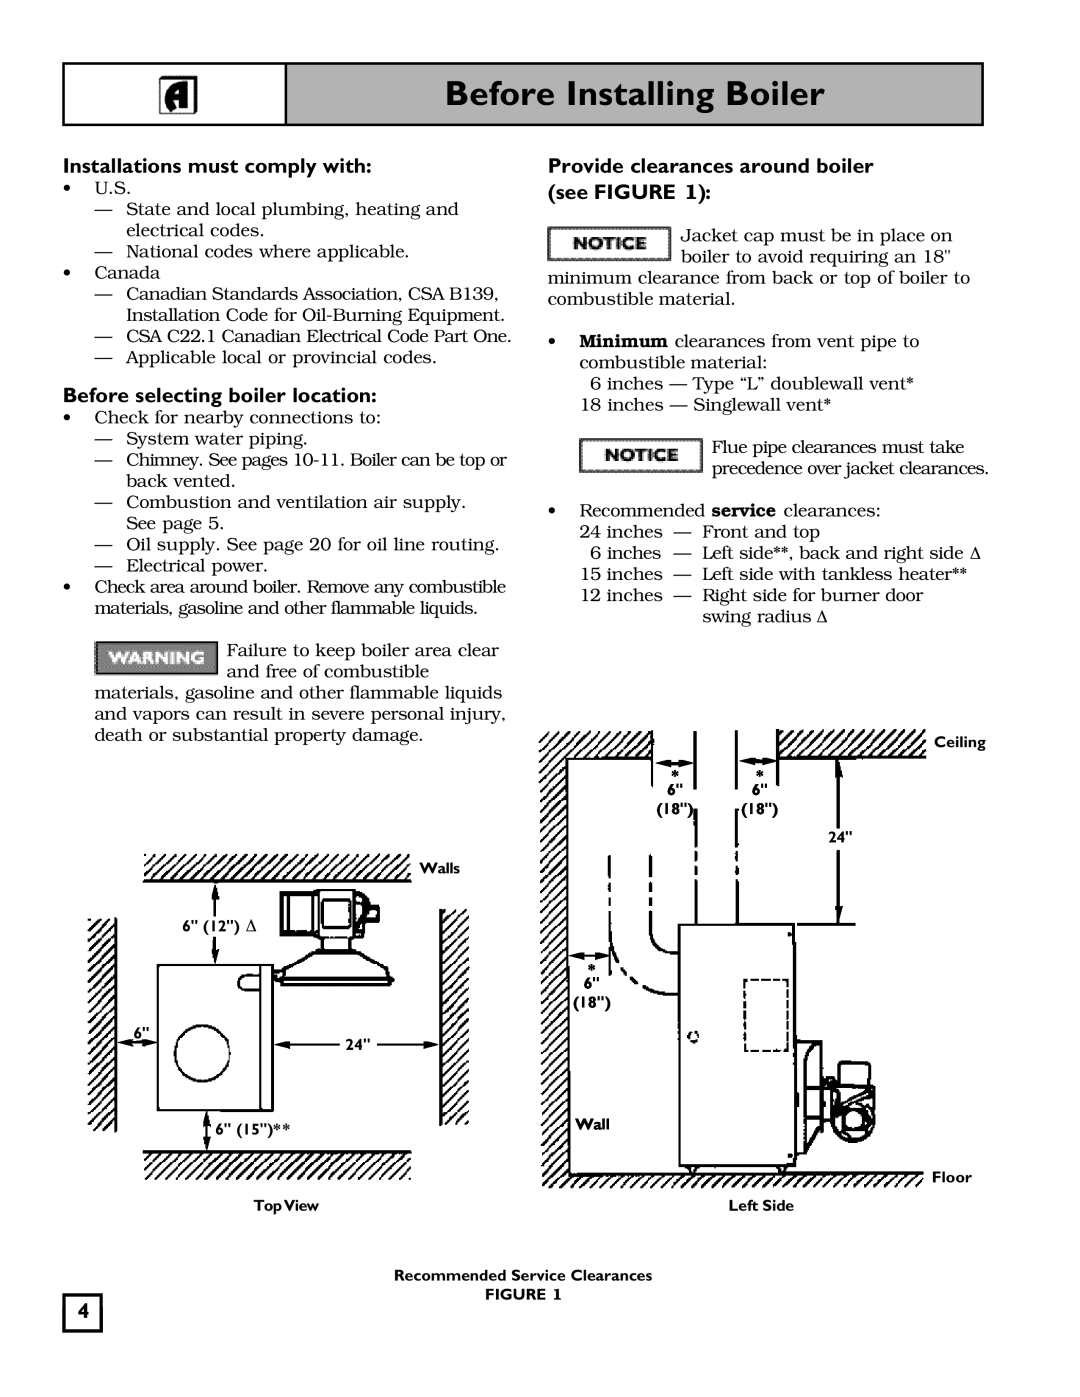 Weil-McLain 550-141-827/1201 Before Installing Boiler, Installations must comply with, Before selecting boiler location 